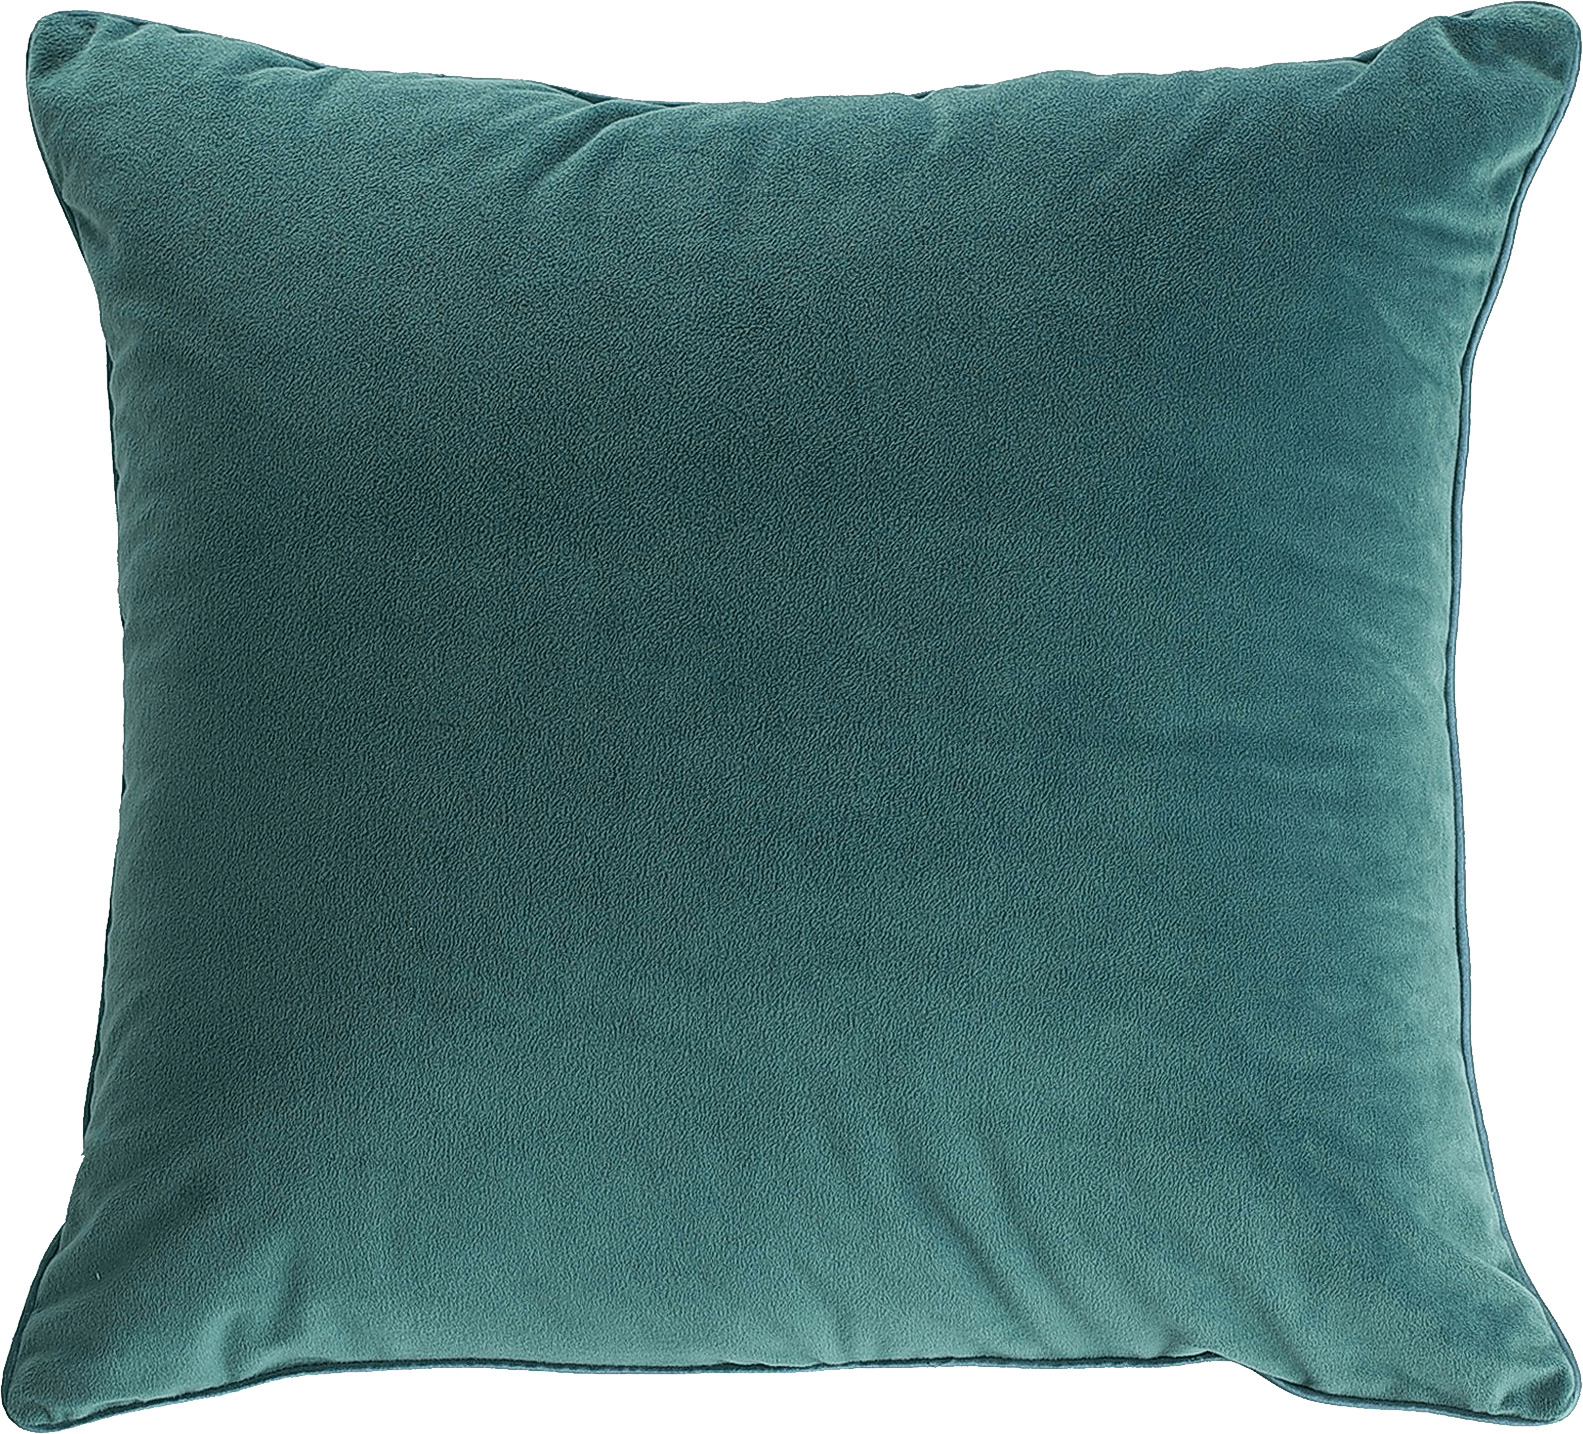 Green Pillow icons